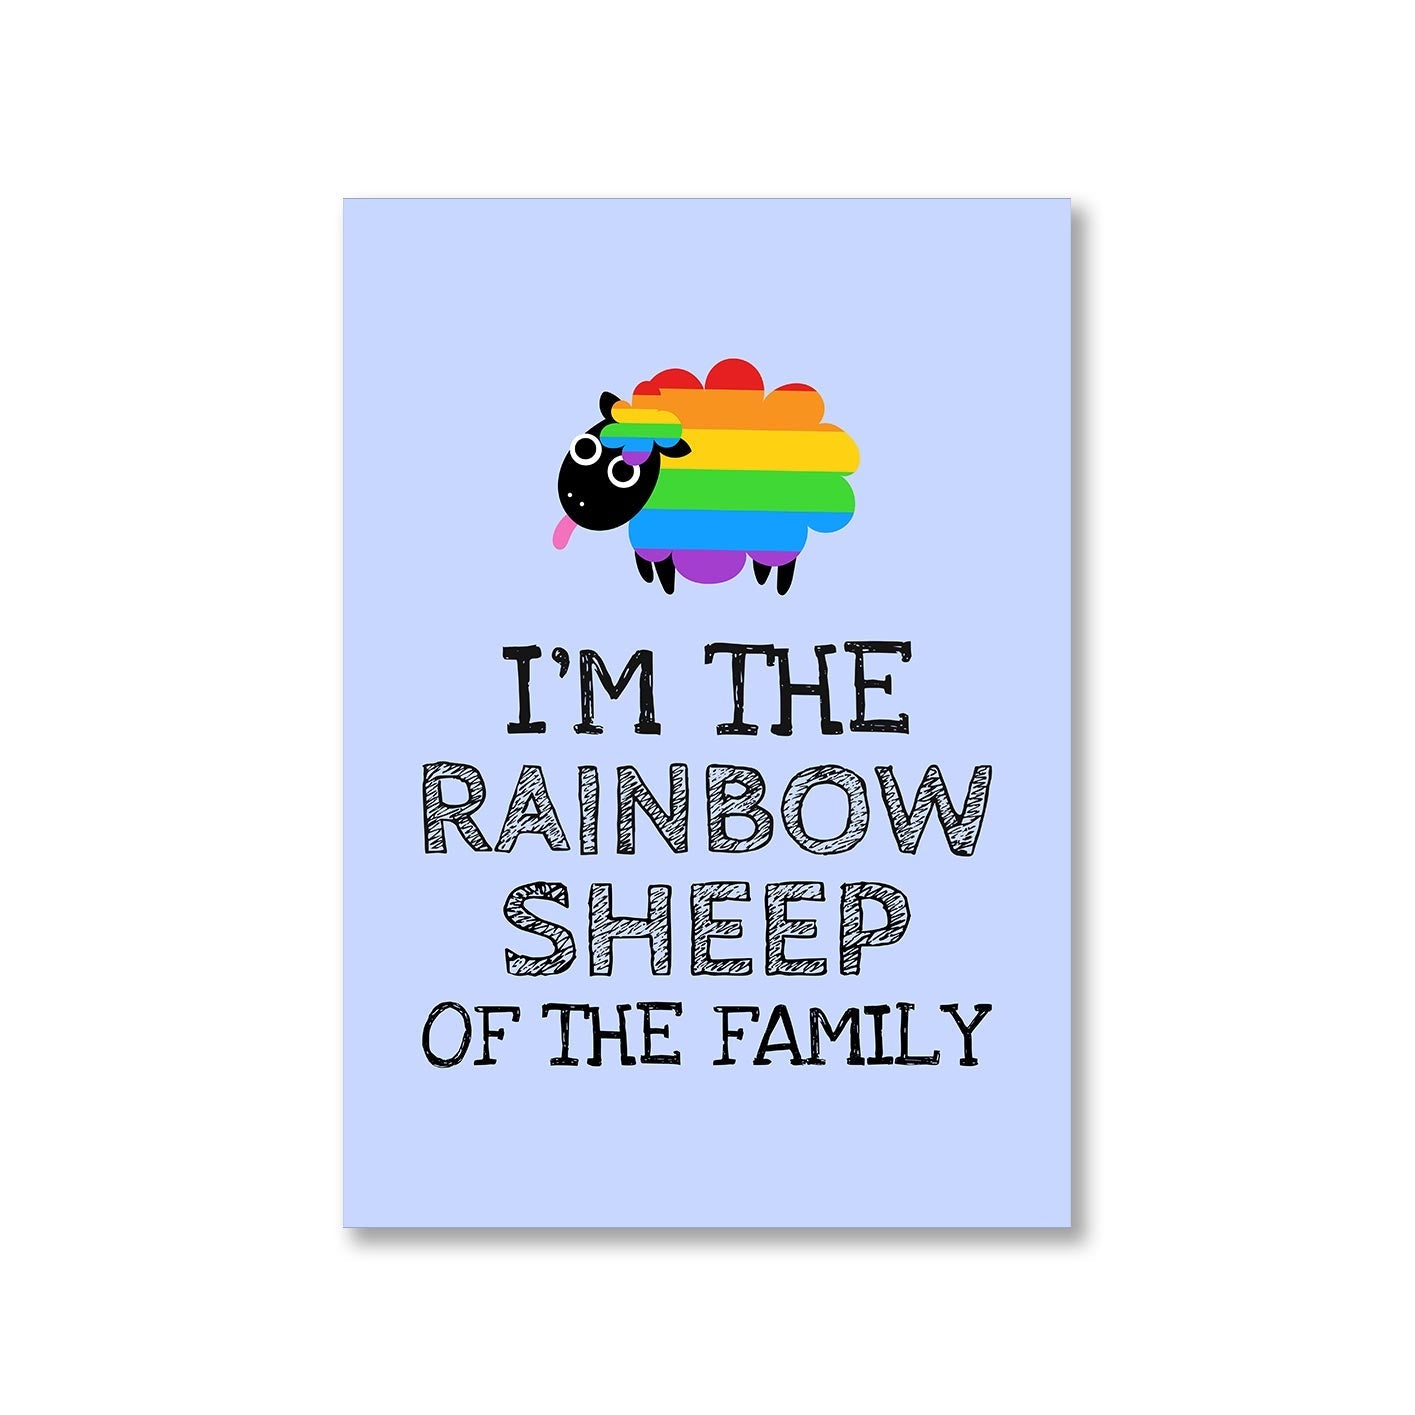 pride rainbow sheep of the family poster wall art buy online india the banyan tee tbt a4 - lgbtqia+